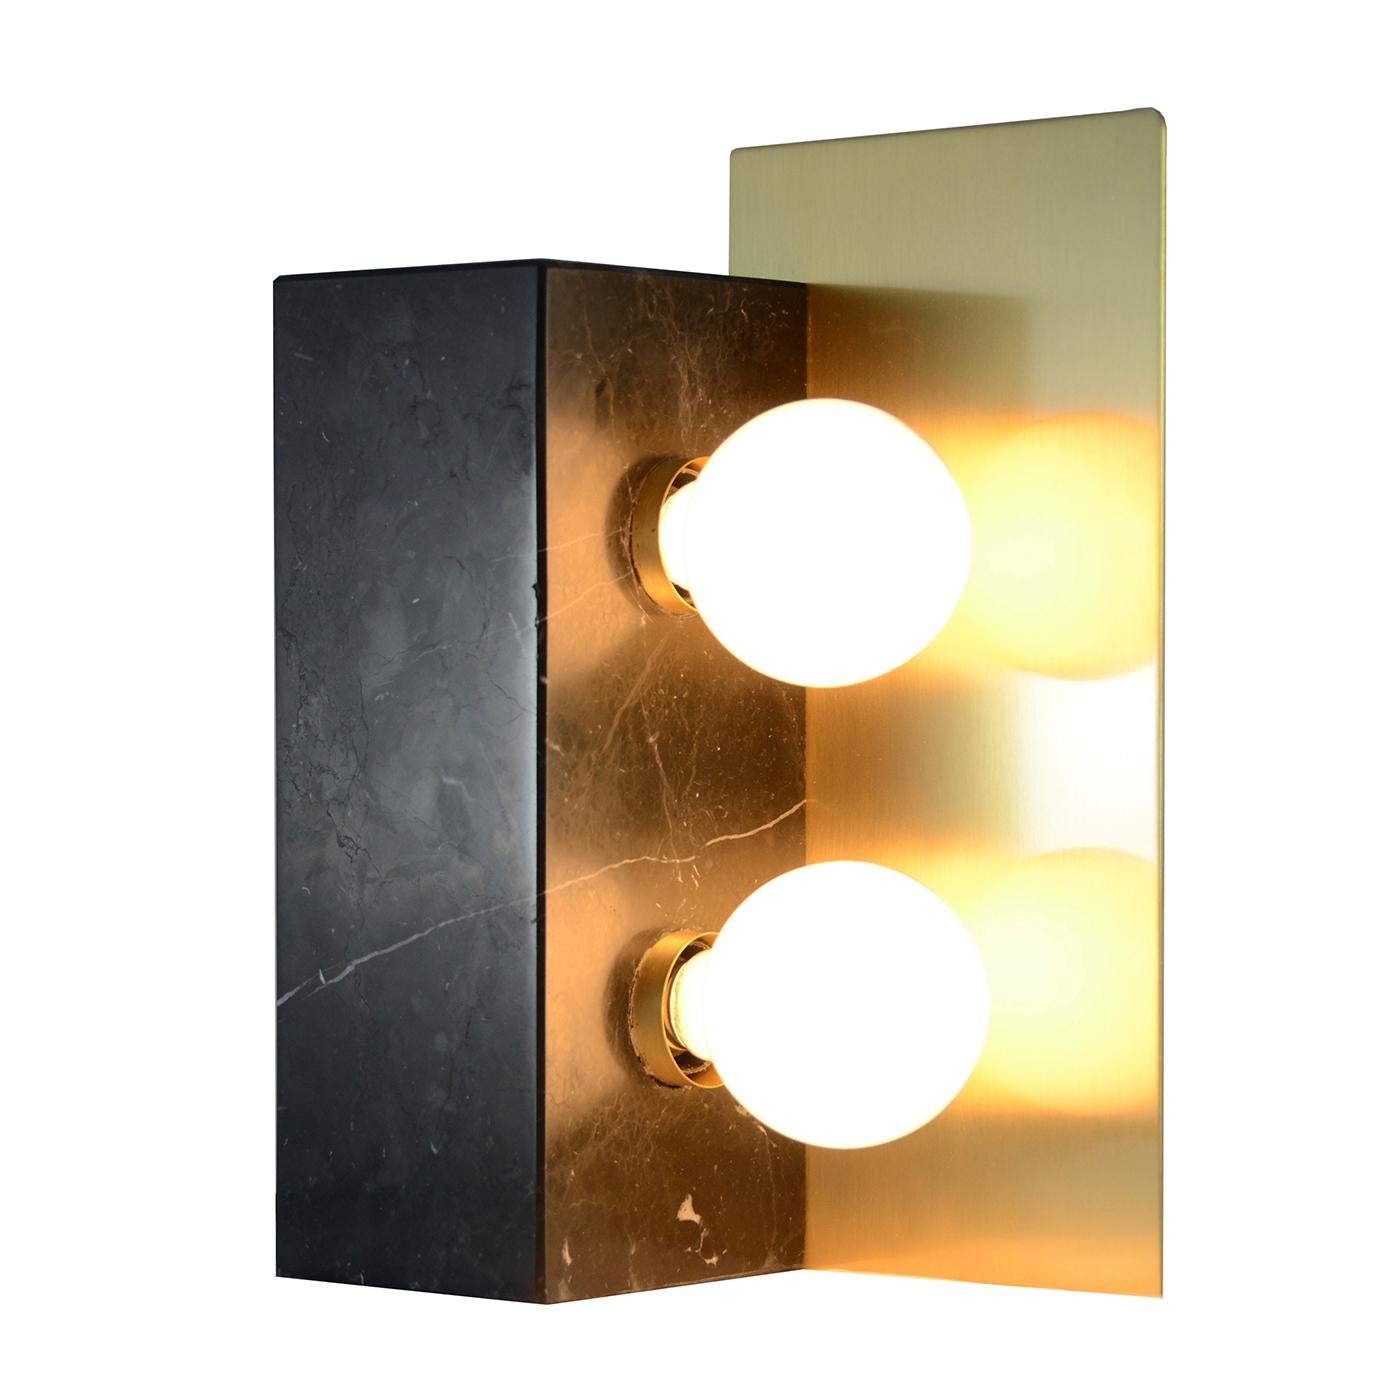 Monolithic table lamp in satin black Marquina marble and satin brass with a vintage look.